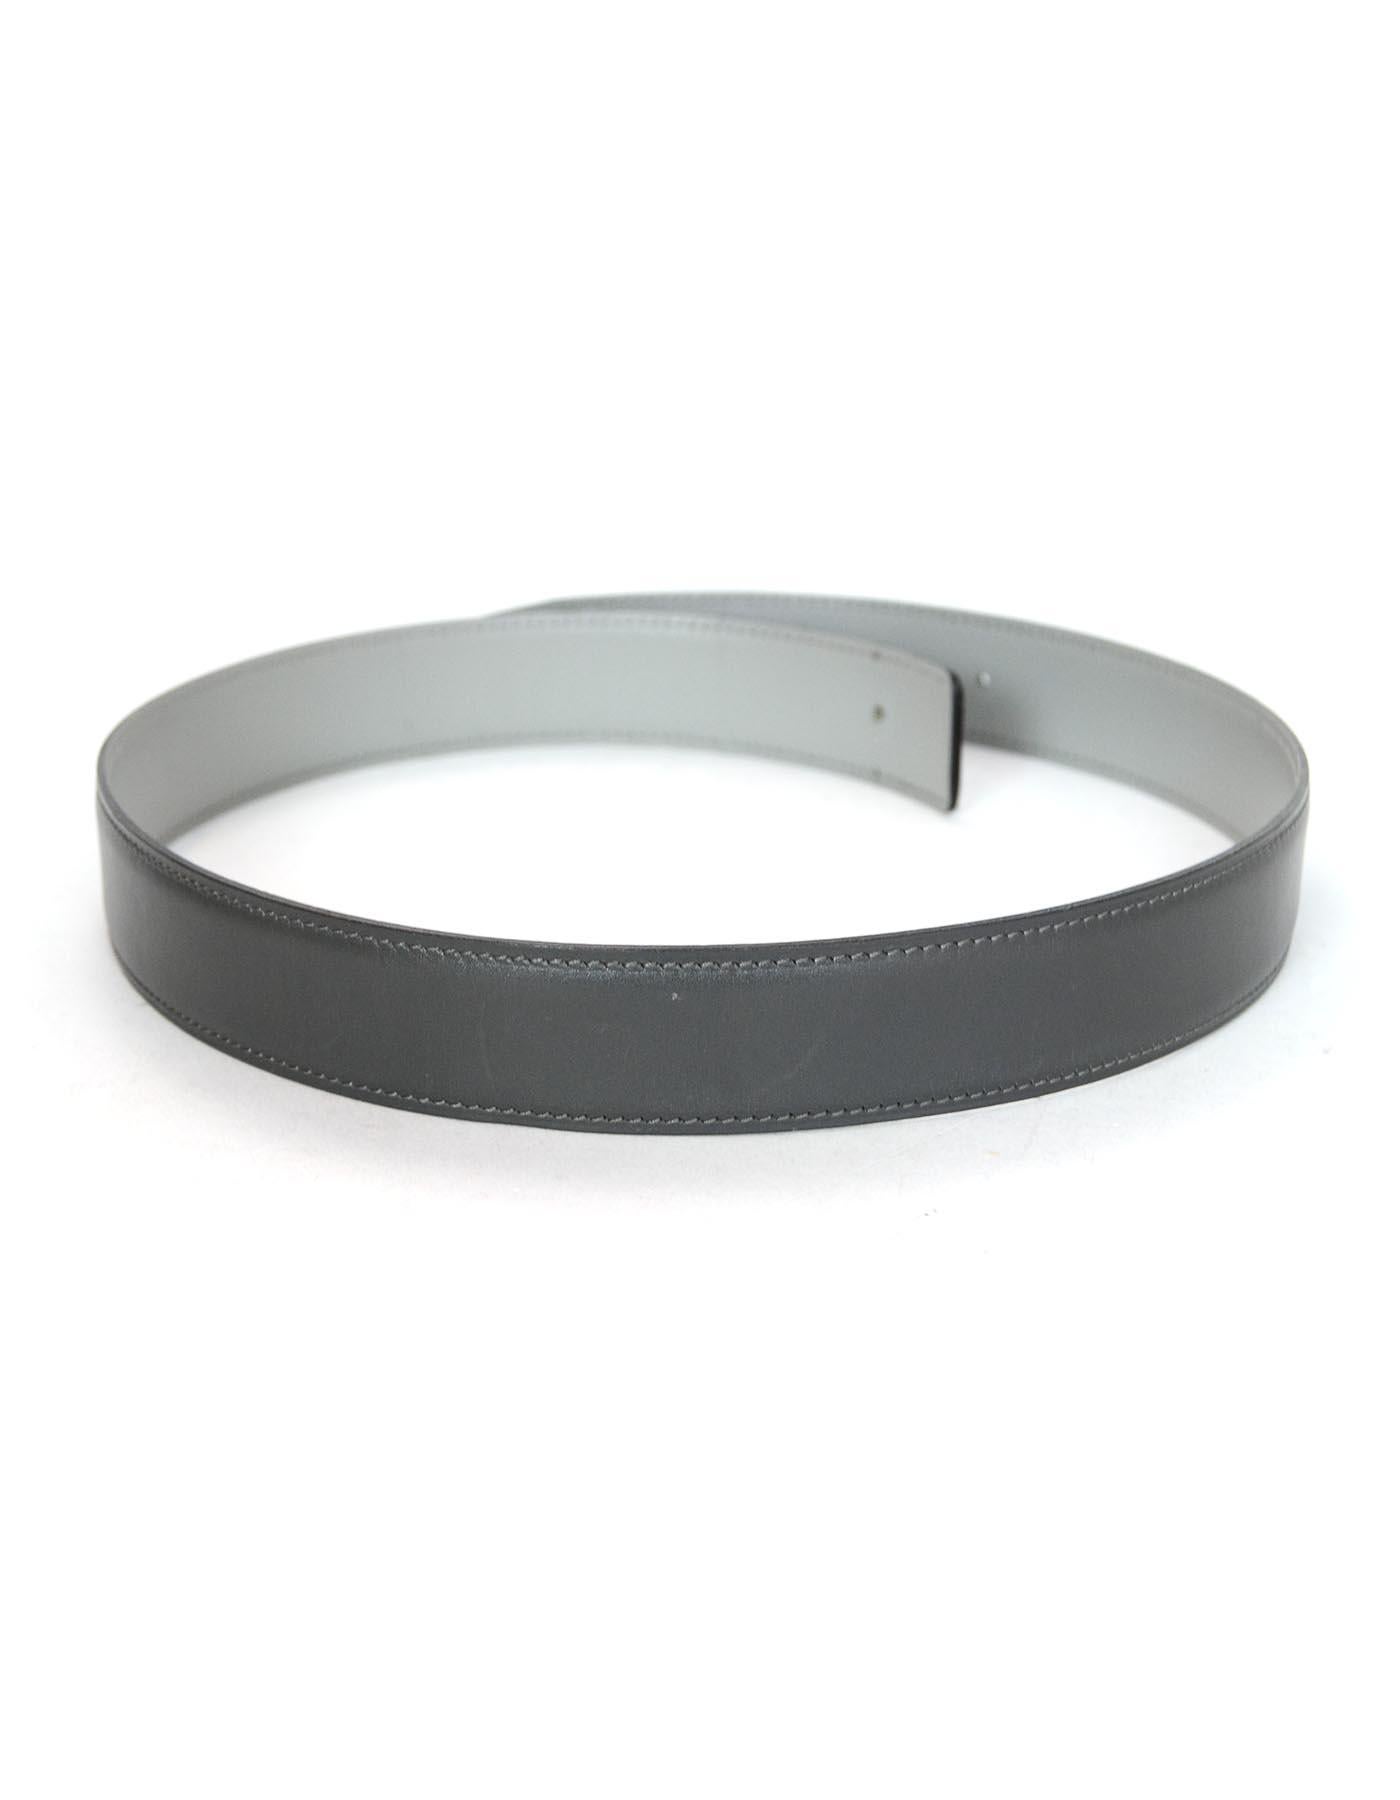 Hermes Grey Reversible Leather 32mm Belt Strap 72

Made In: France
Year Of Production: 1999 (C in a square marking on belt)
Color: Light and dark grey
Hardware: No belt buckle included 
Materials: Smooth leather 
Closure/Opening: No belt buckle